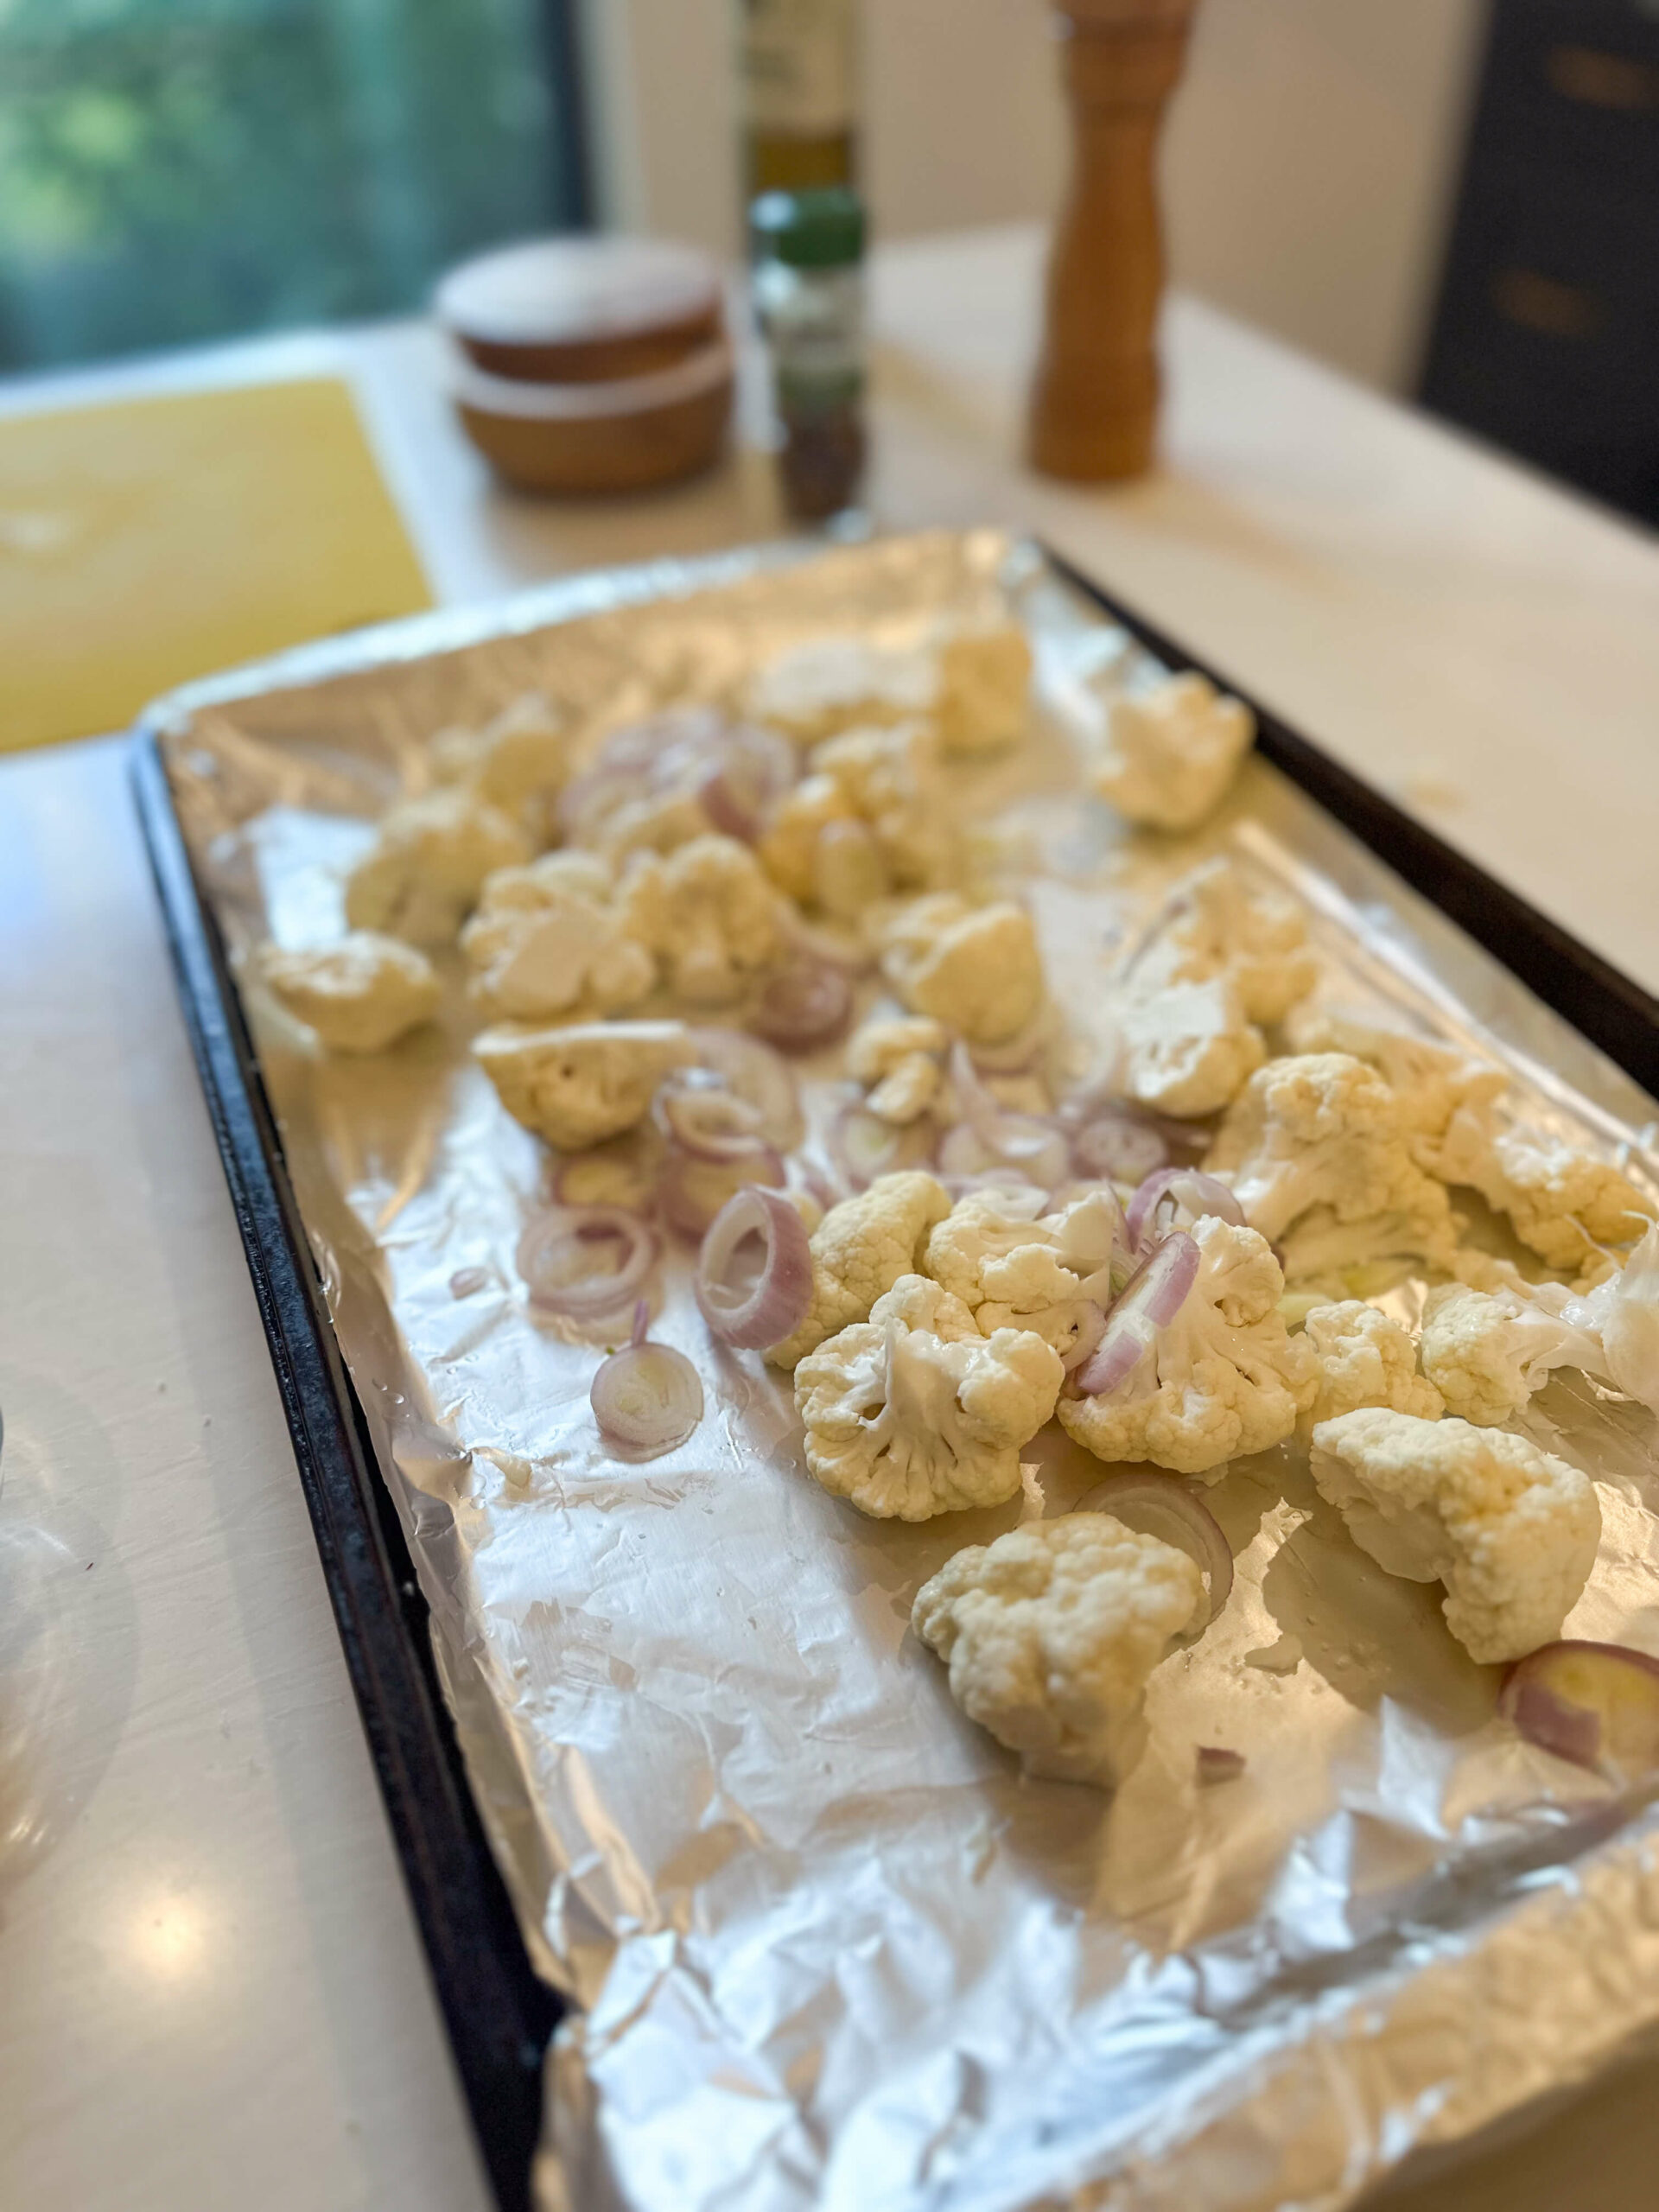 cauliflower in lined baking sheet with sliced shallots